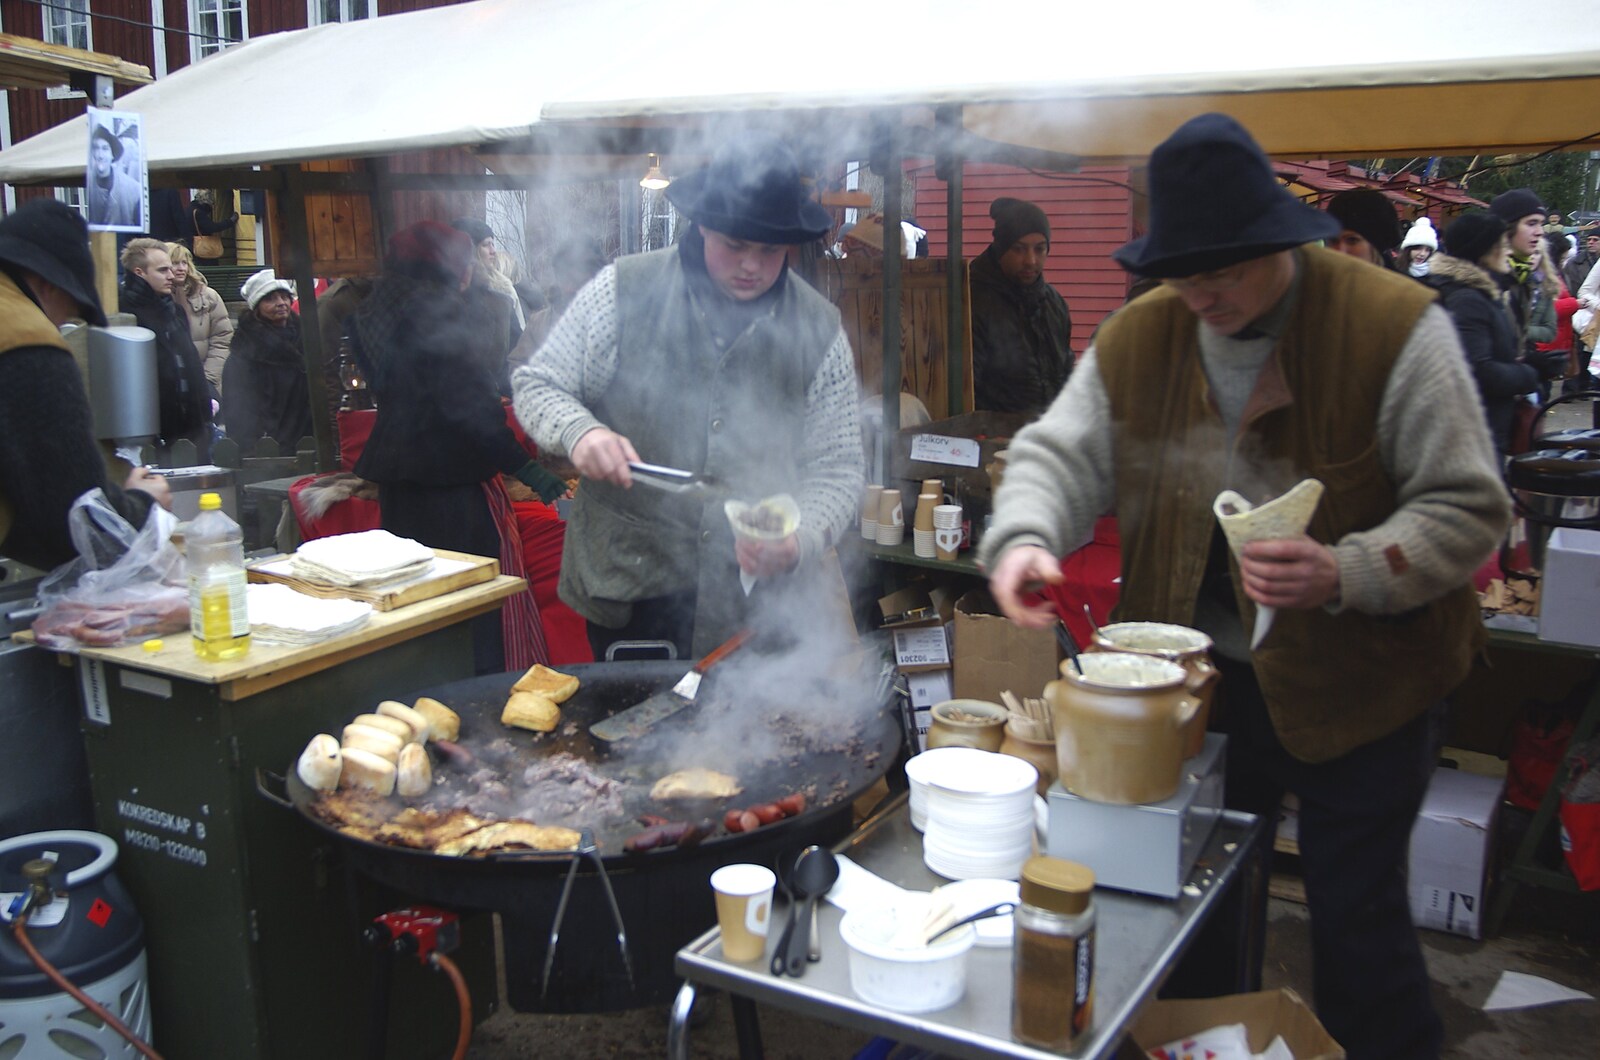 Traditional Christmas food in a huge smoking pan from A Few Hours in Skansen, Stockholm, Sweden - 17th December 2007